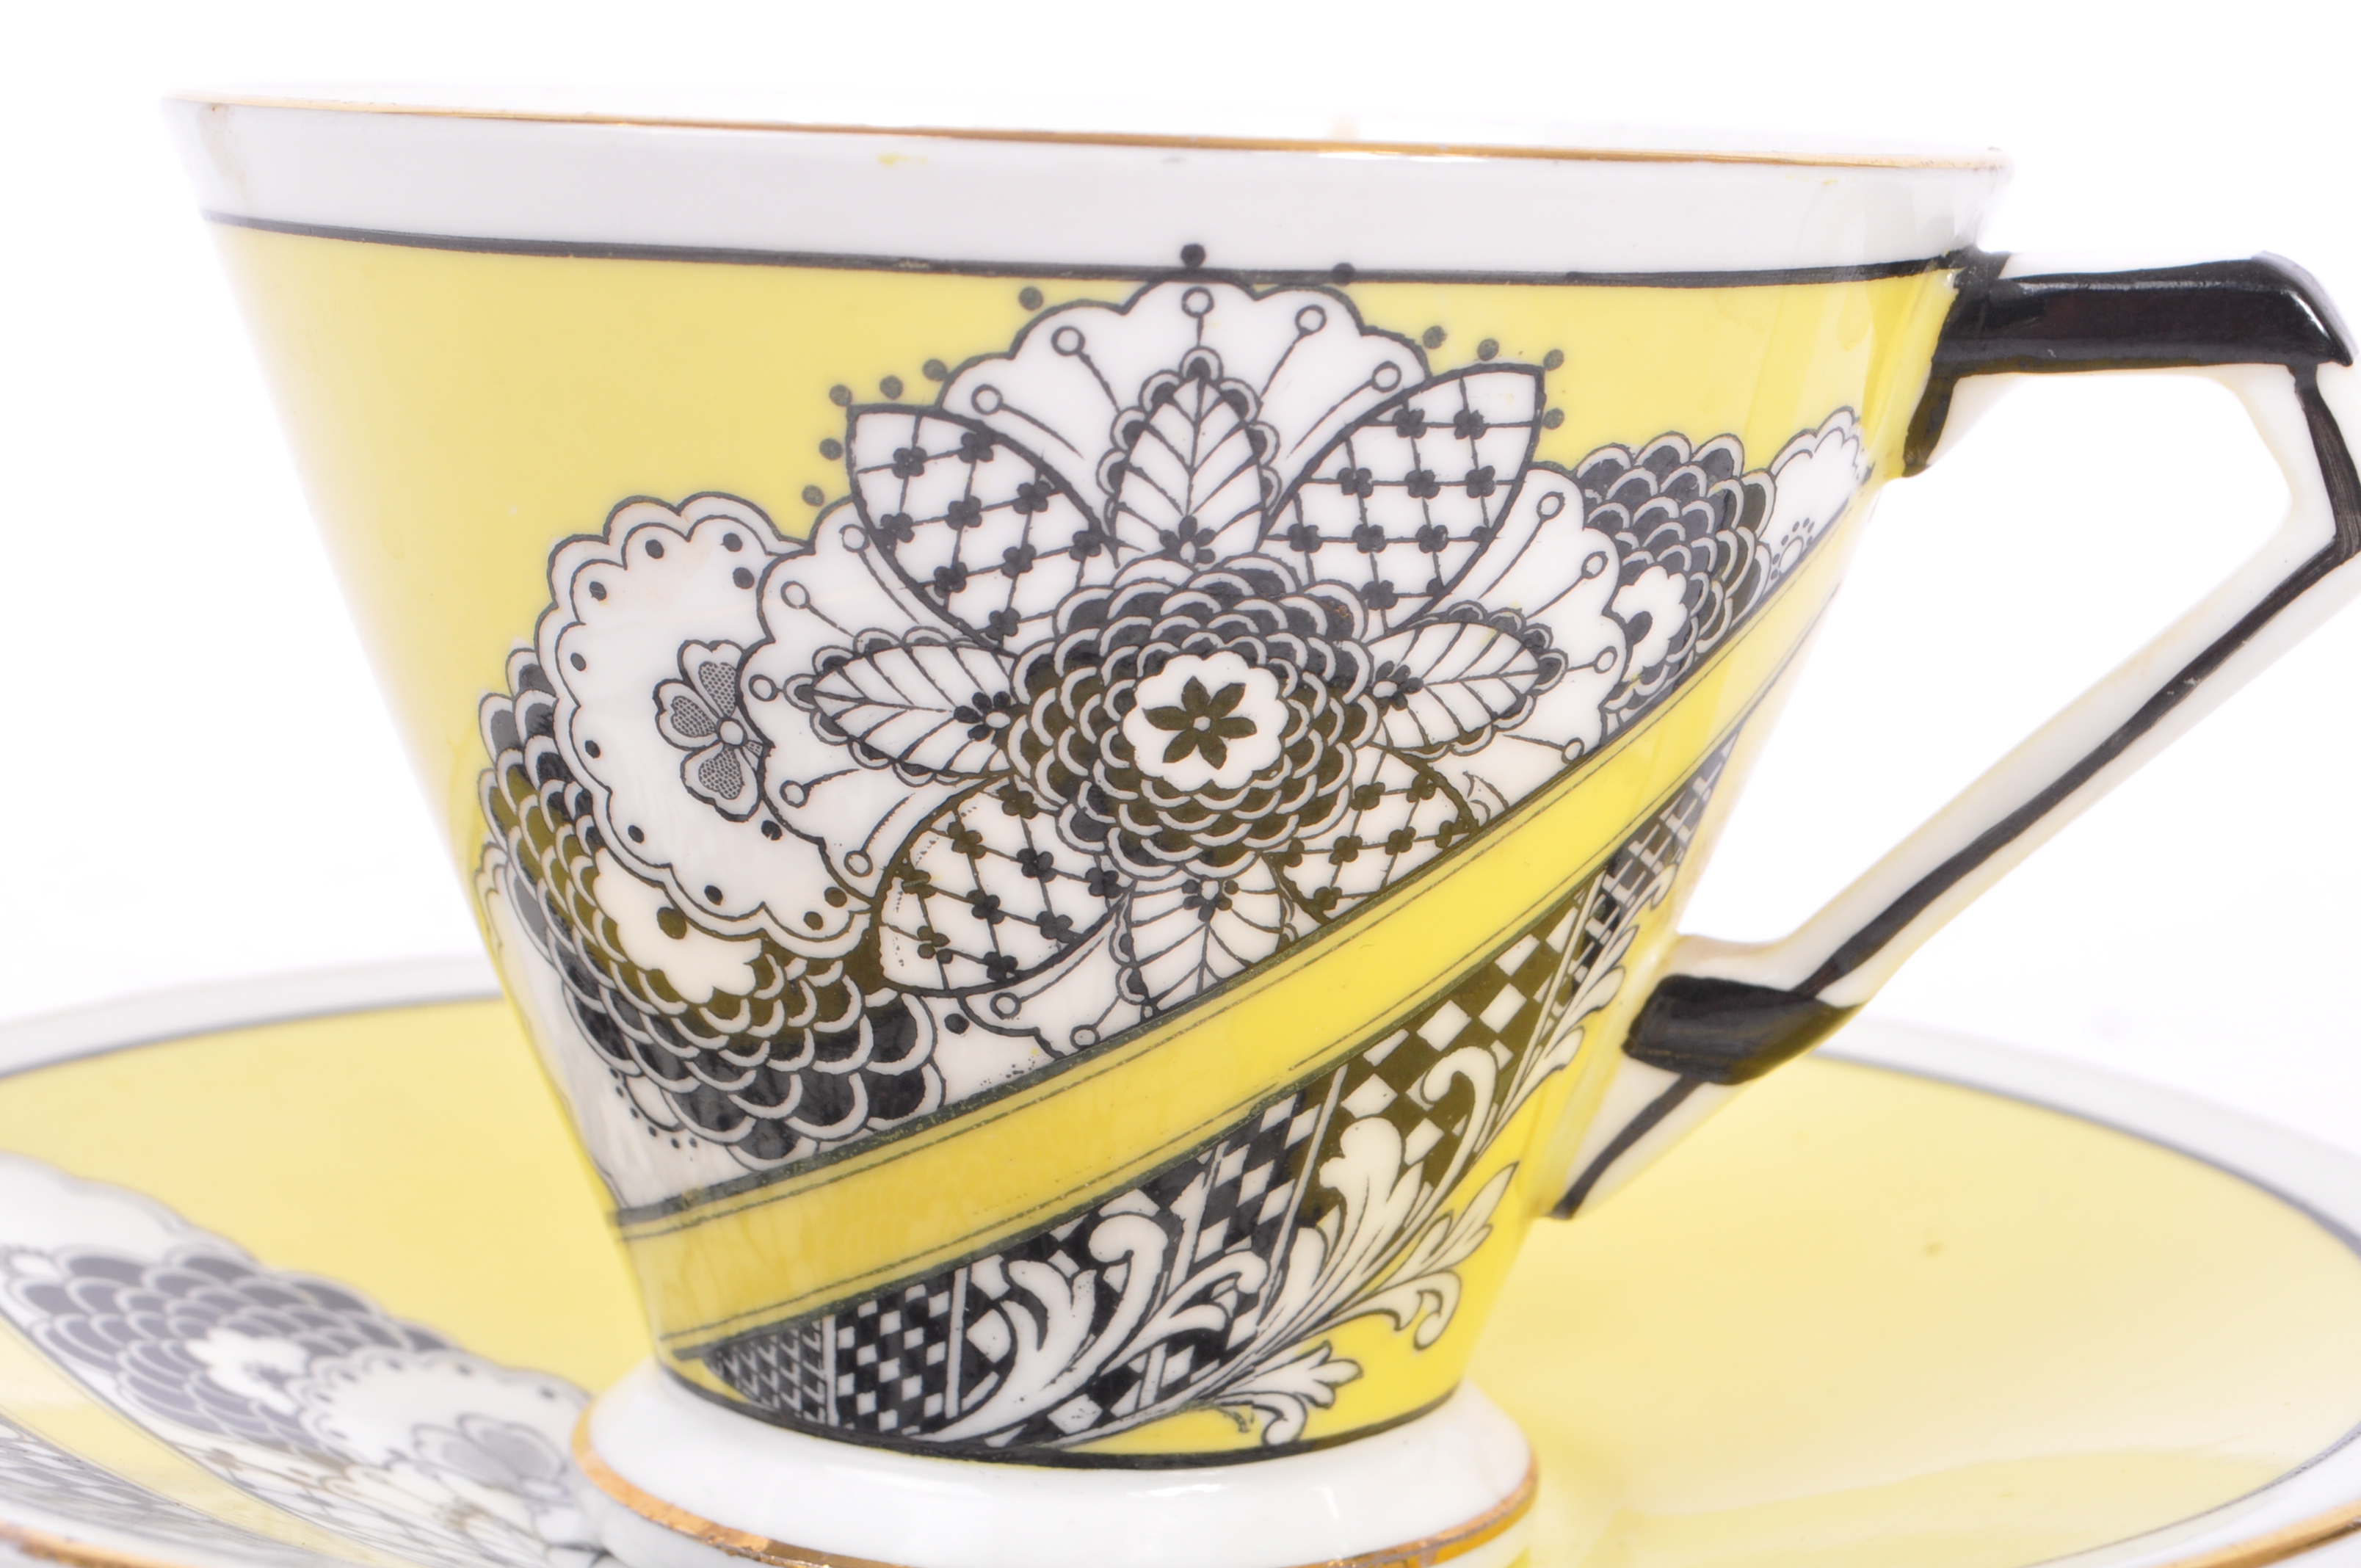 1930S 20TH CENTURY ART DECO HAMMERSLEY PORCELAIN CUP & SAUCER - Image 3 of 6